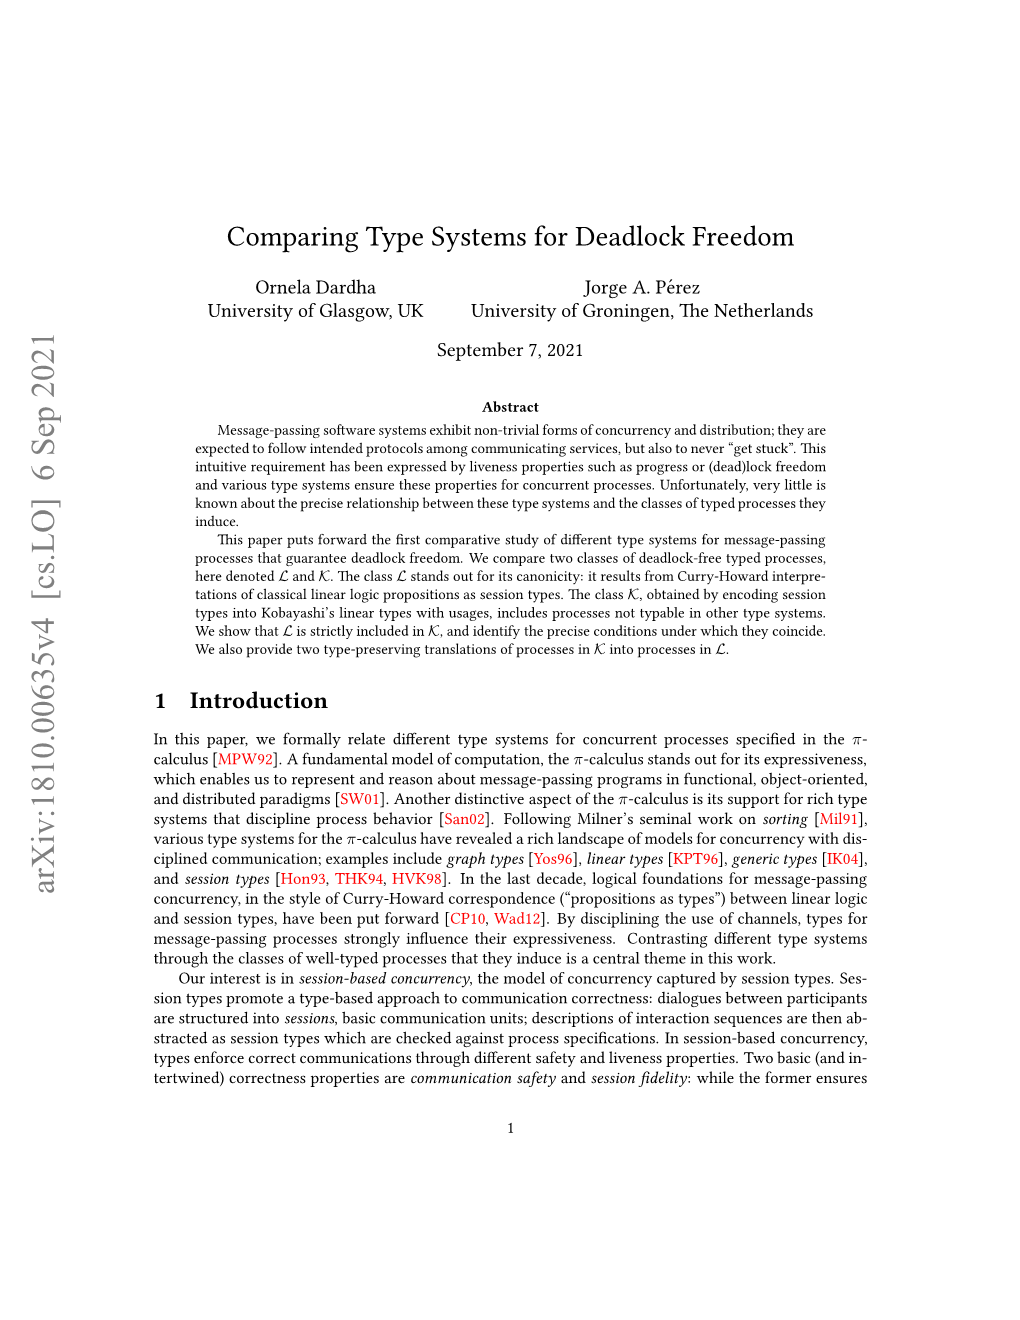 Comparing Type Systems for Deadlock Freedom